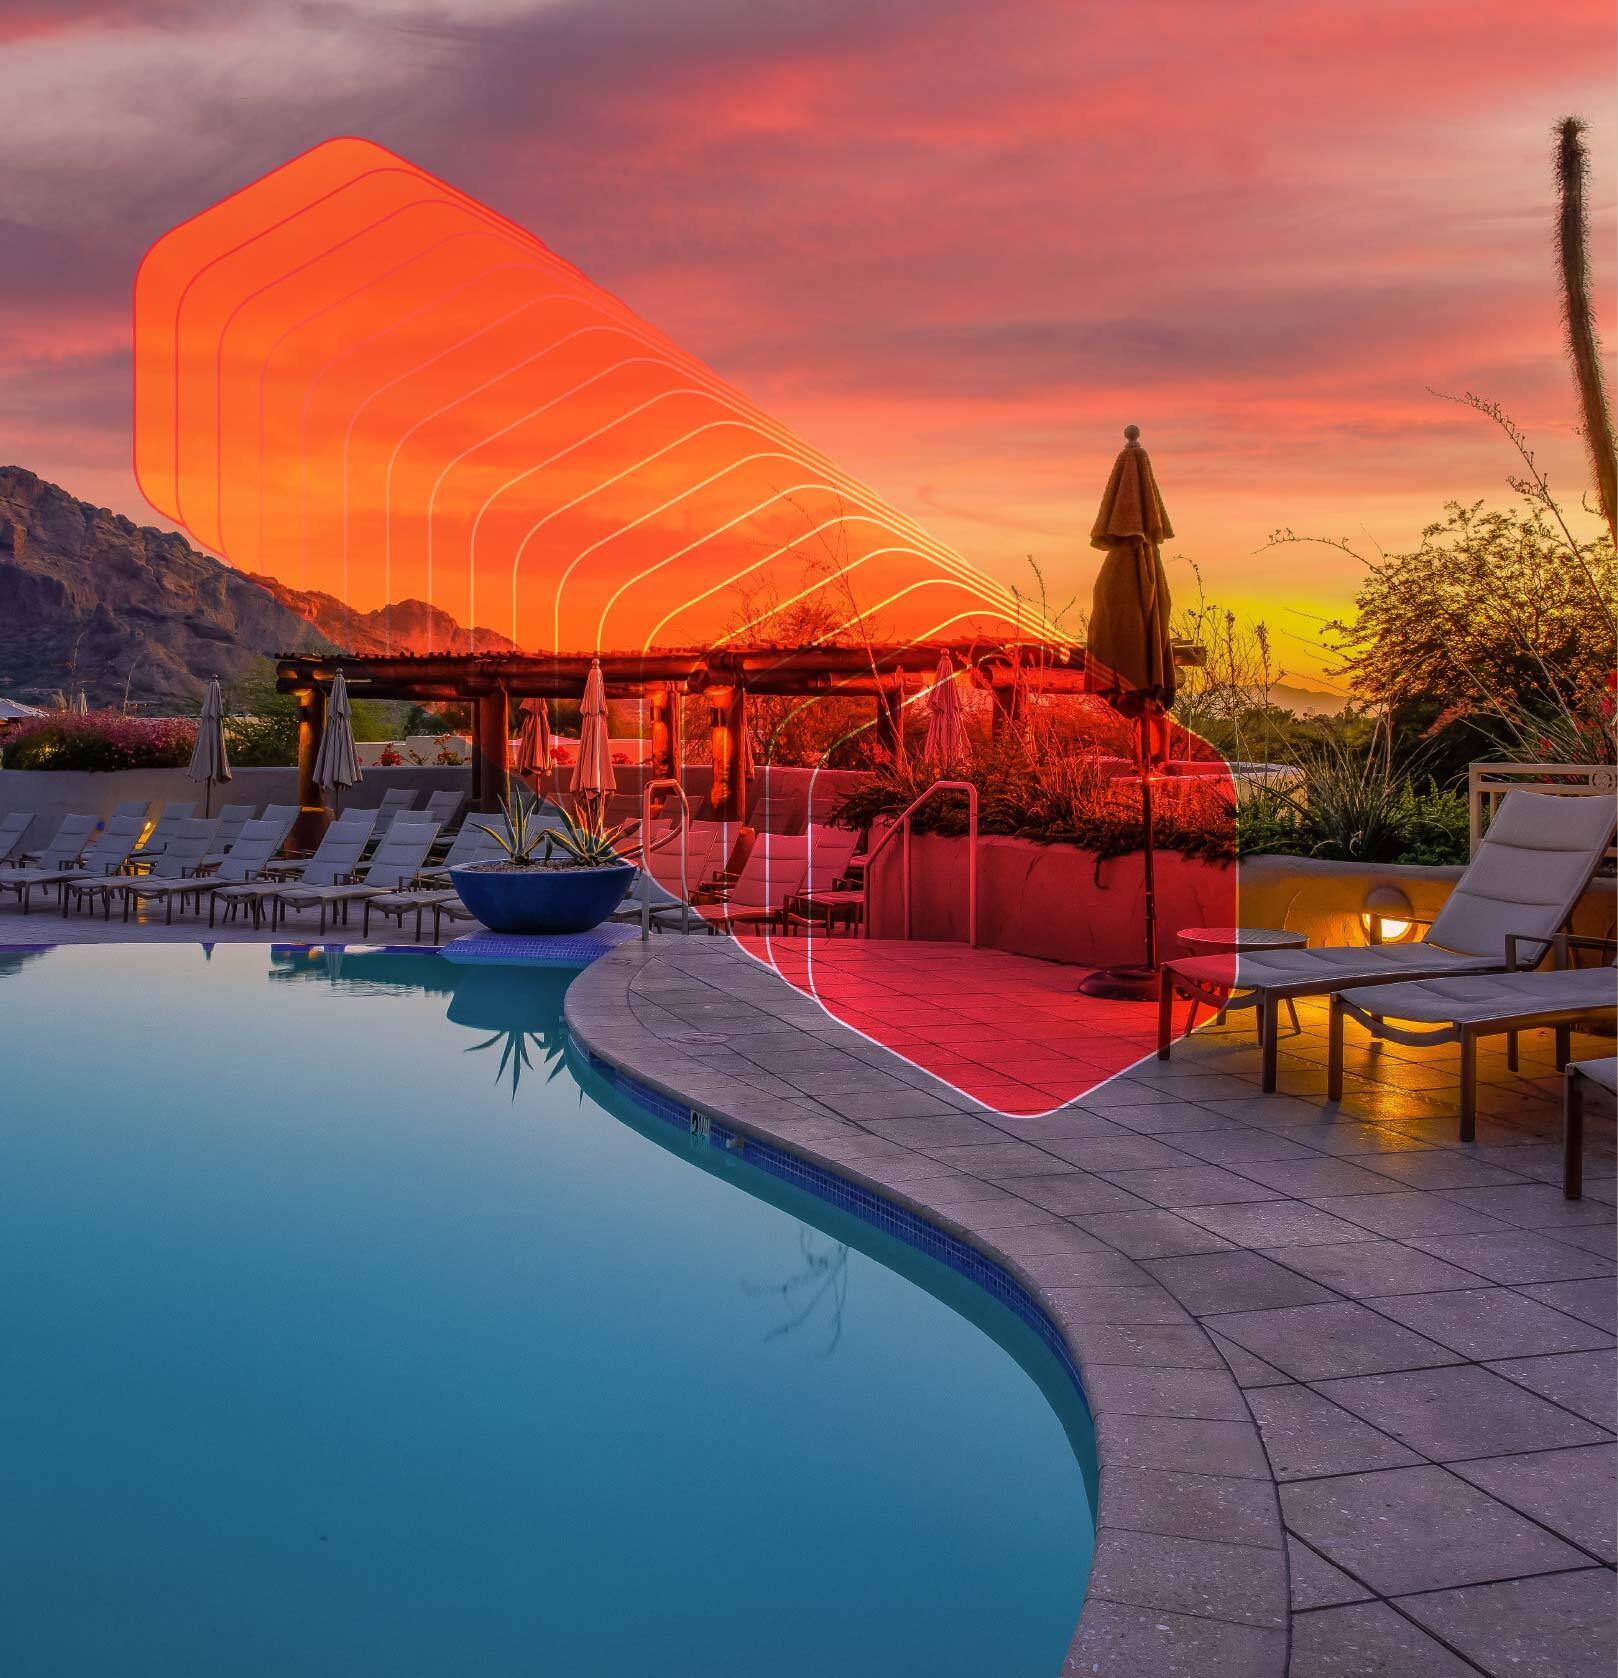 A serene pool with comfortable lounge chairs and a breathtaking sunset in the background.